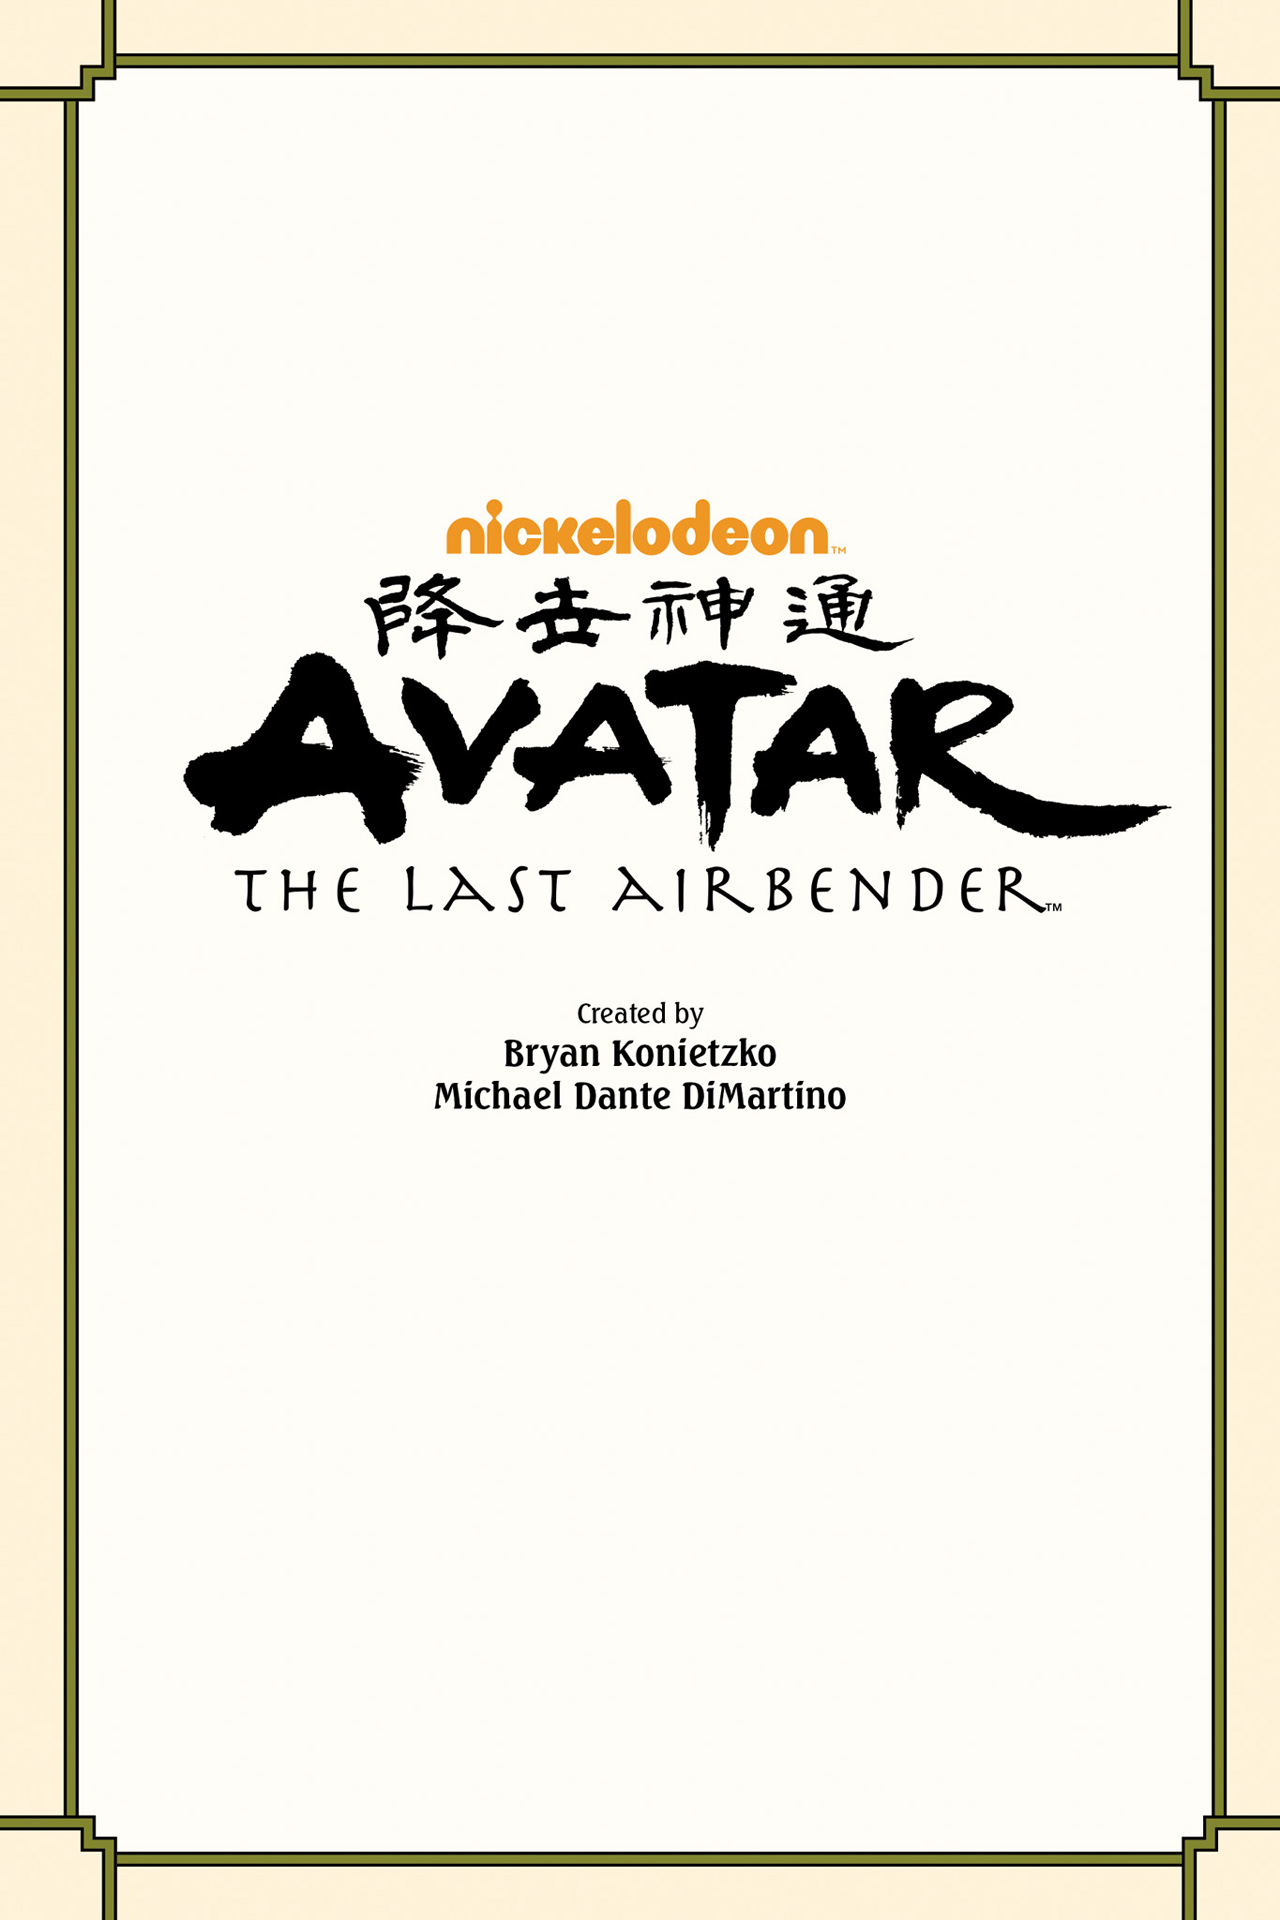 Read online Nickelodeon Avatar: The Last Airbender - The Search comic -  Issue # Part 3 - 2